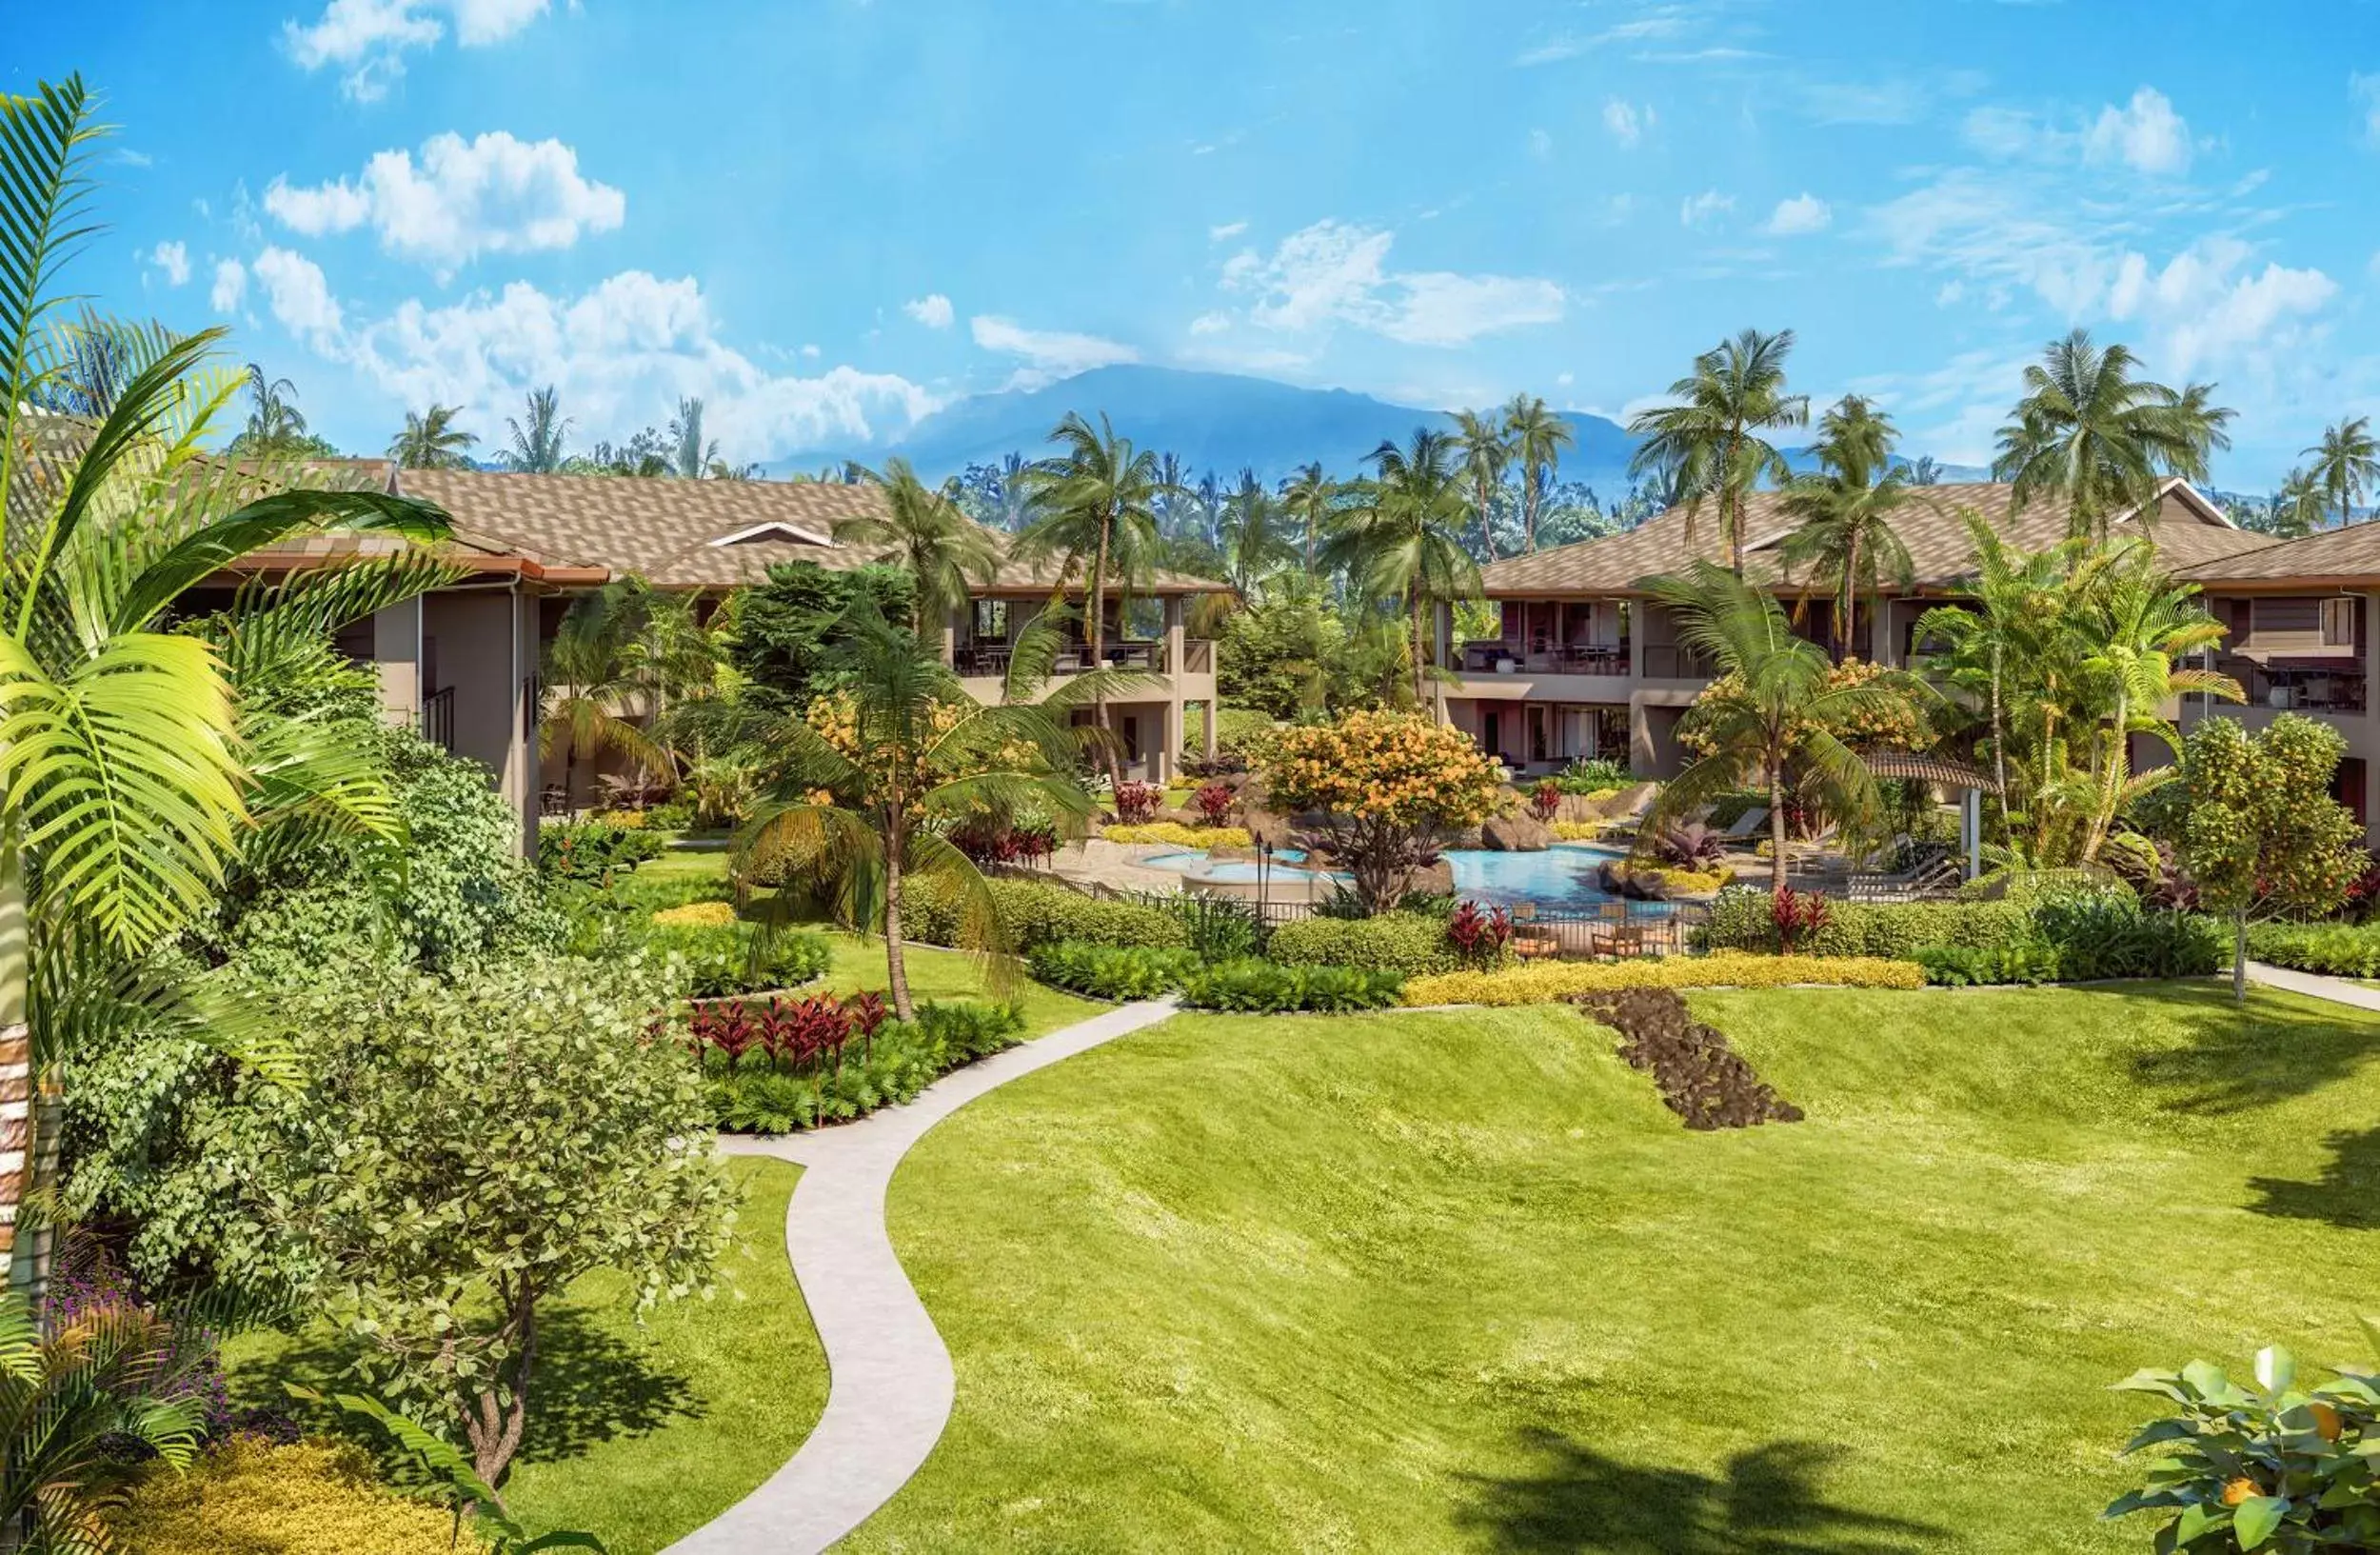 Property Building in OUTRIGGER Honua Kai Resort and Spa